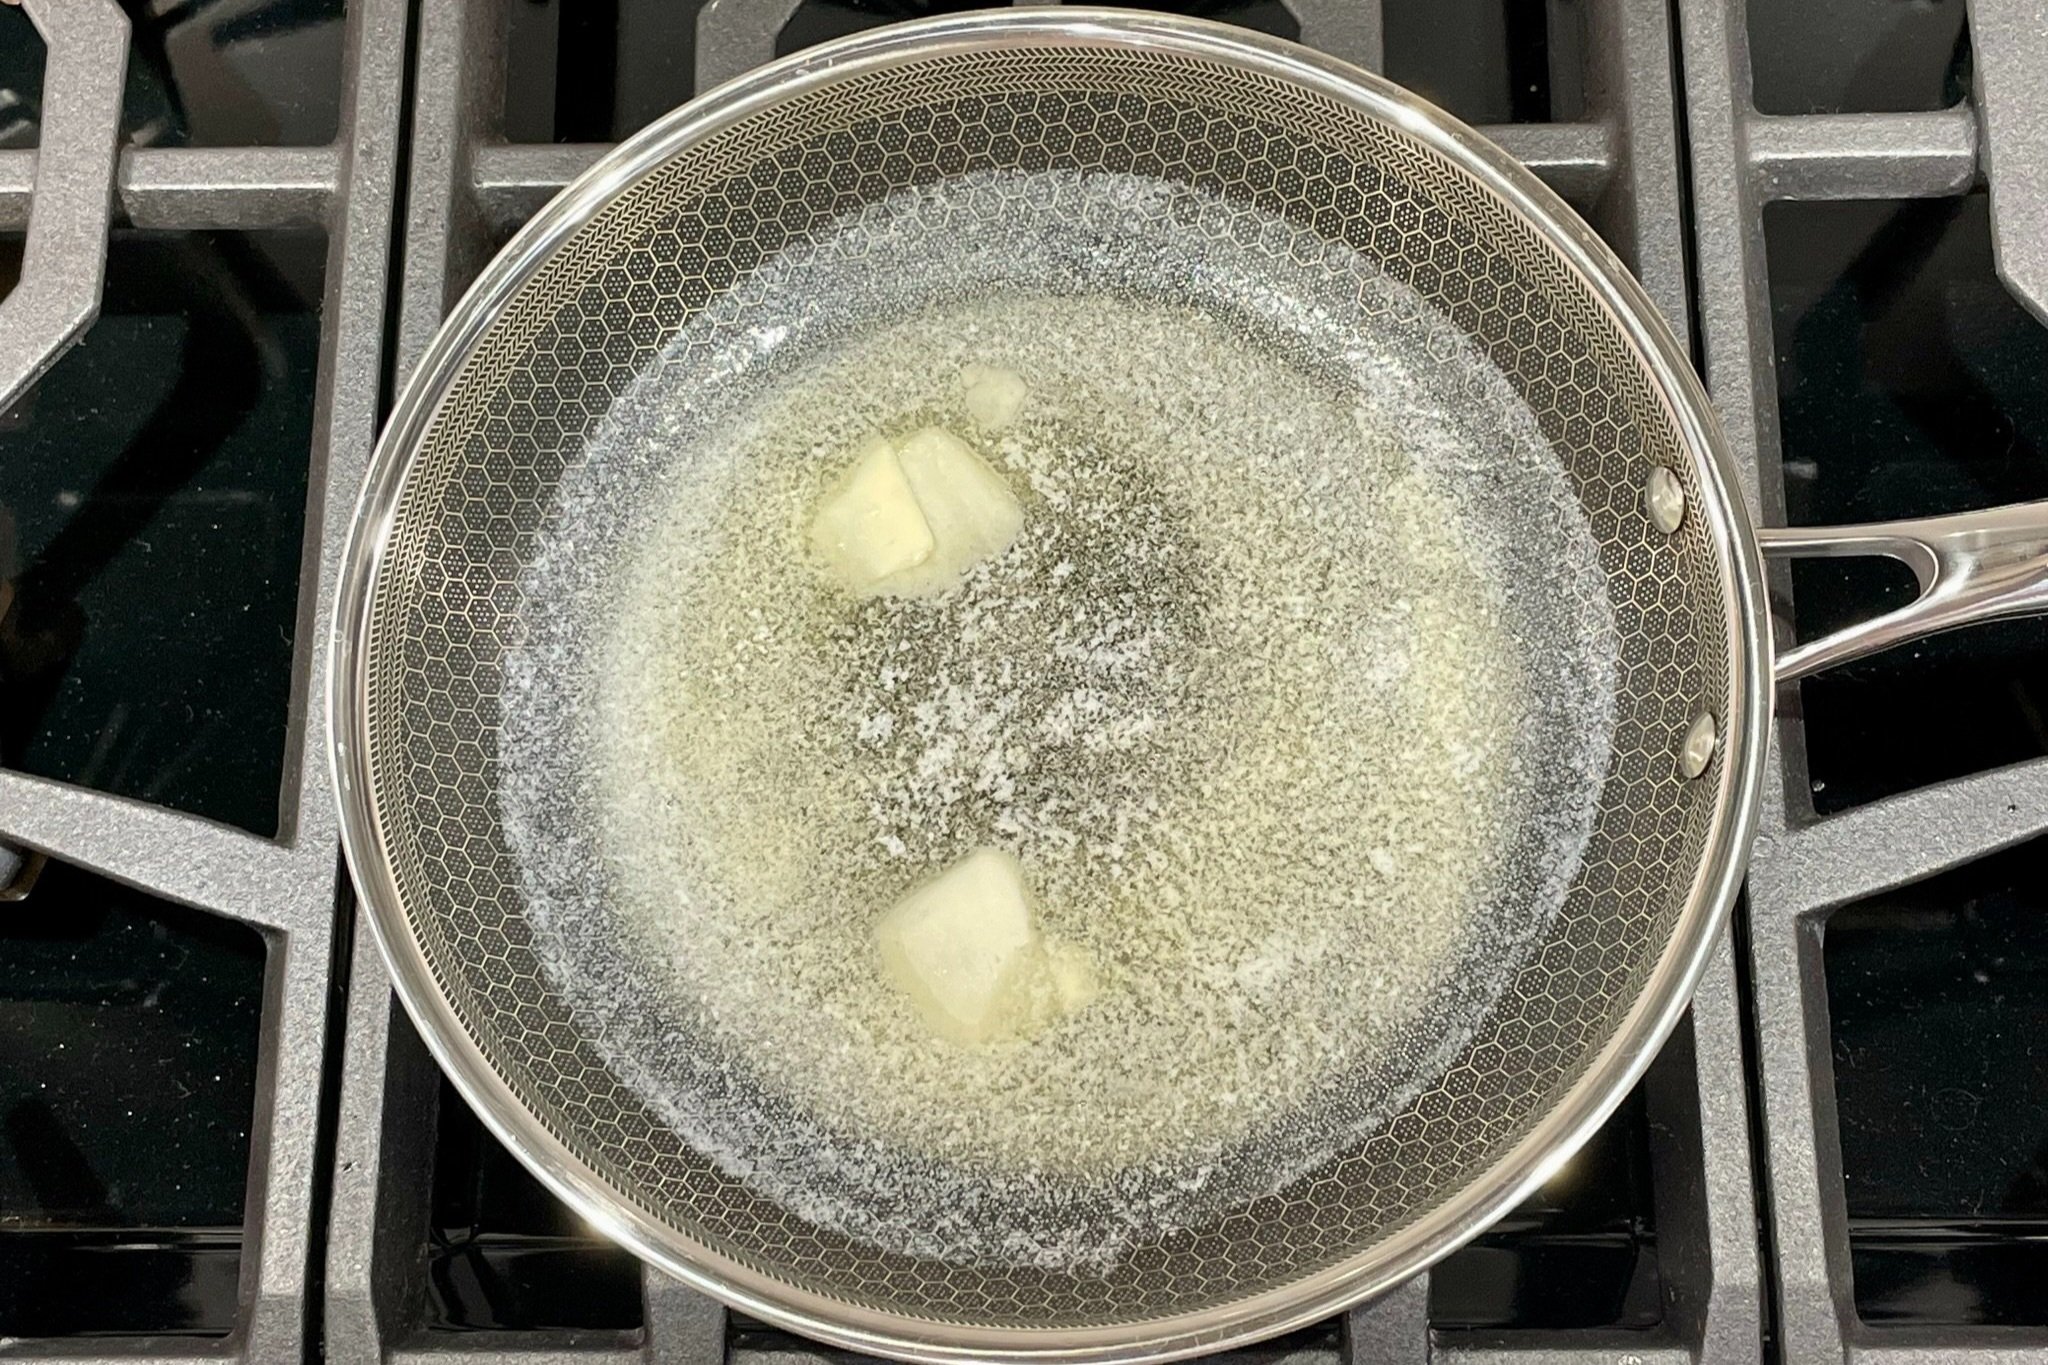 Butter is bubbling.